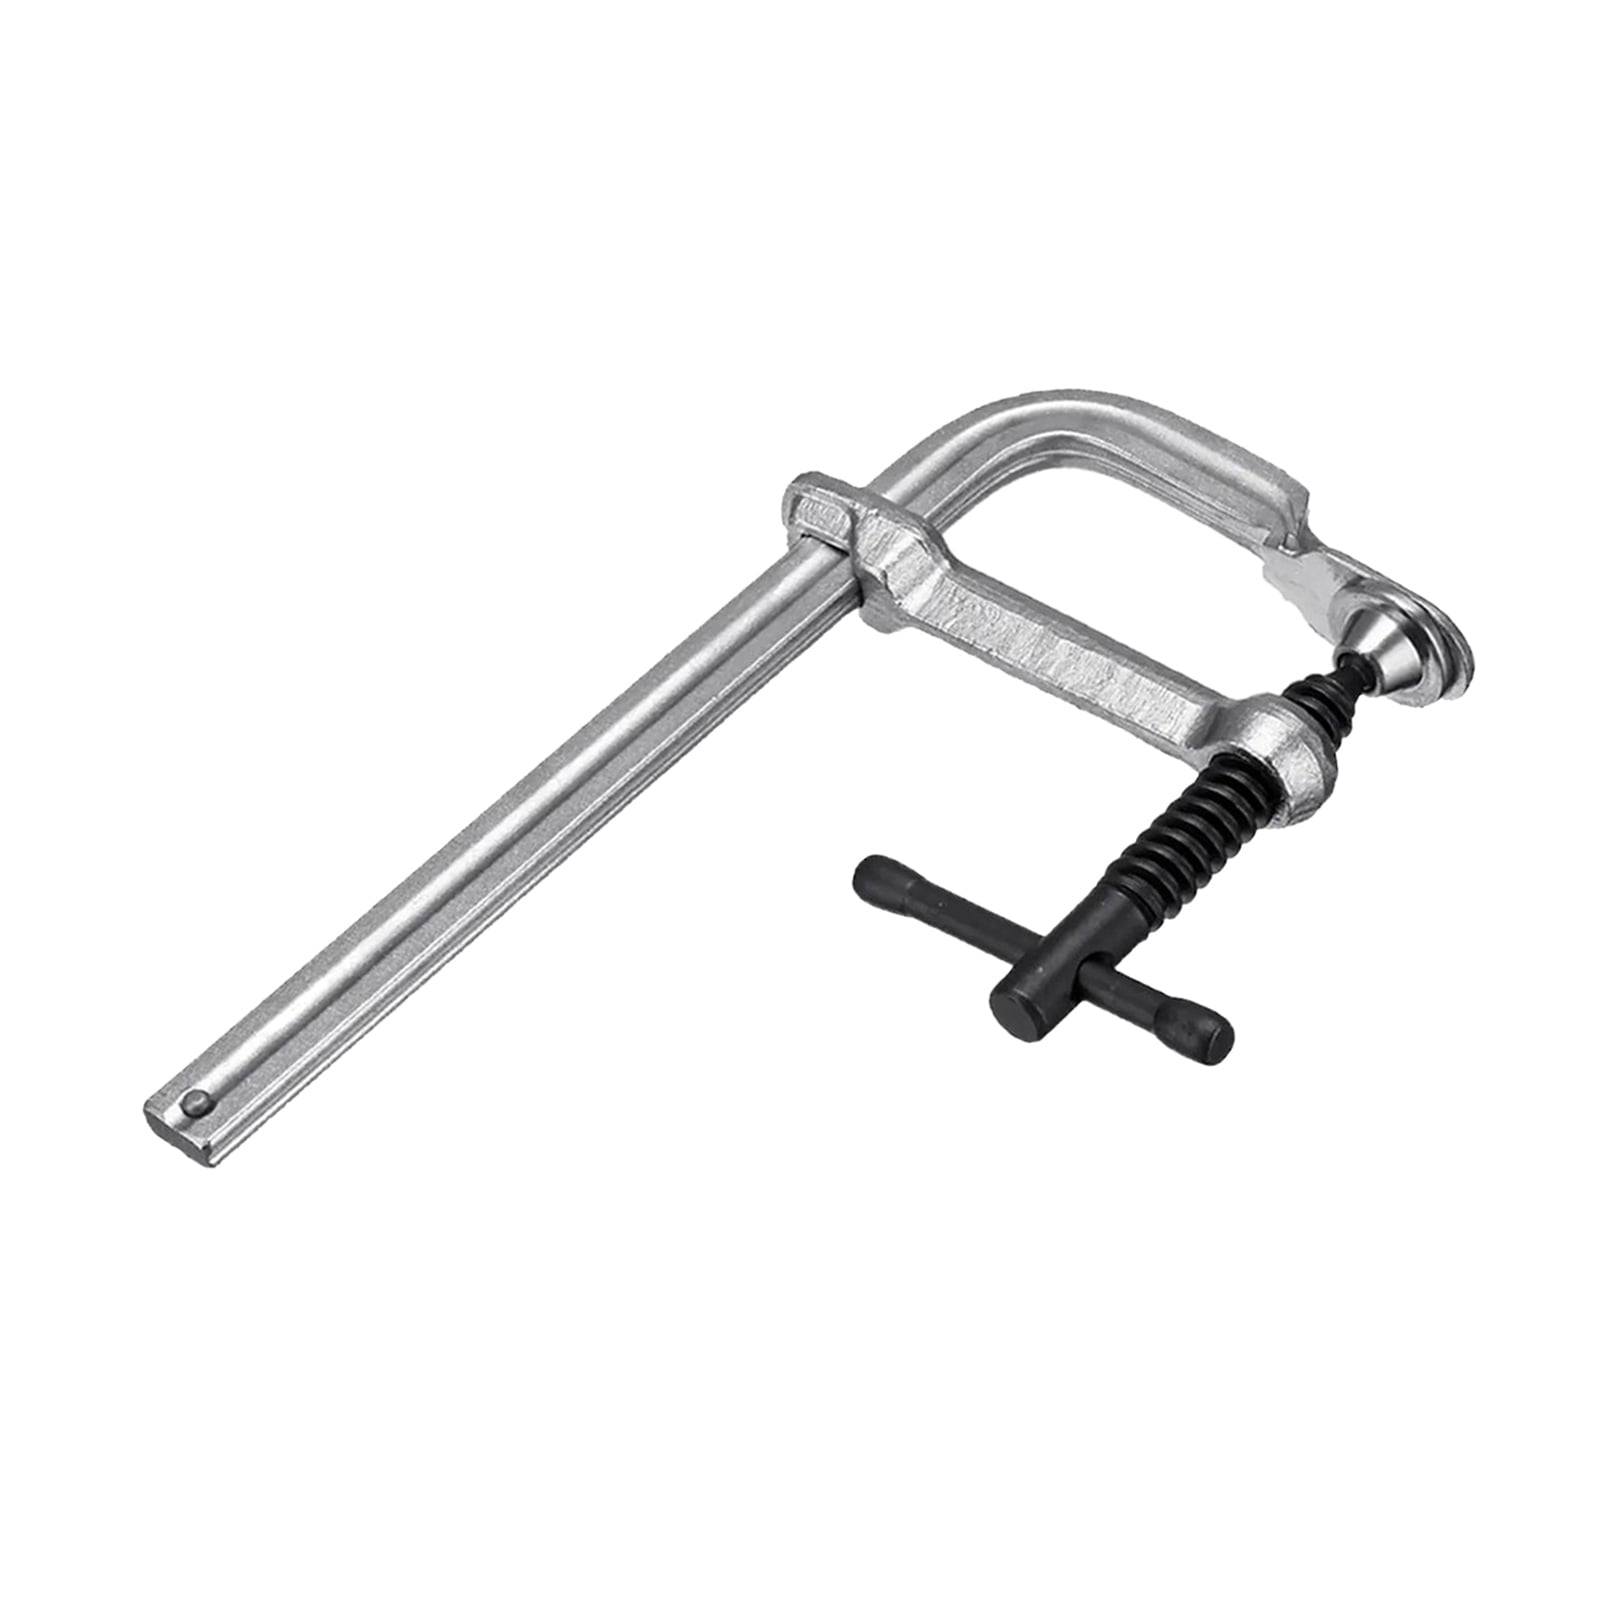 Ratchet Action Heavy Duty Utility Clamp with 8-1/2" Clamping Capacity 